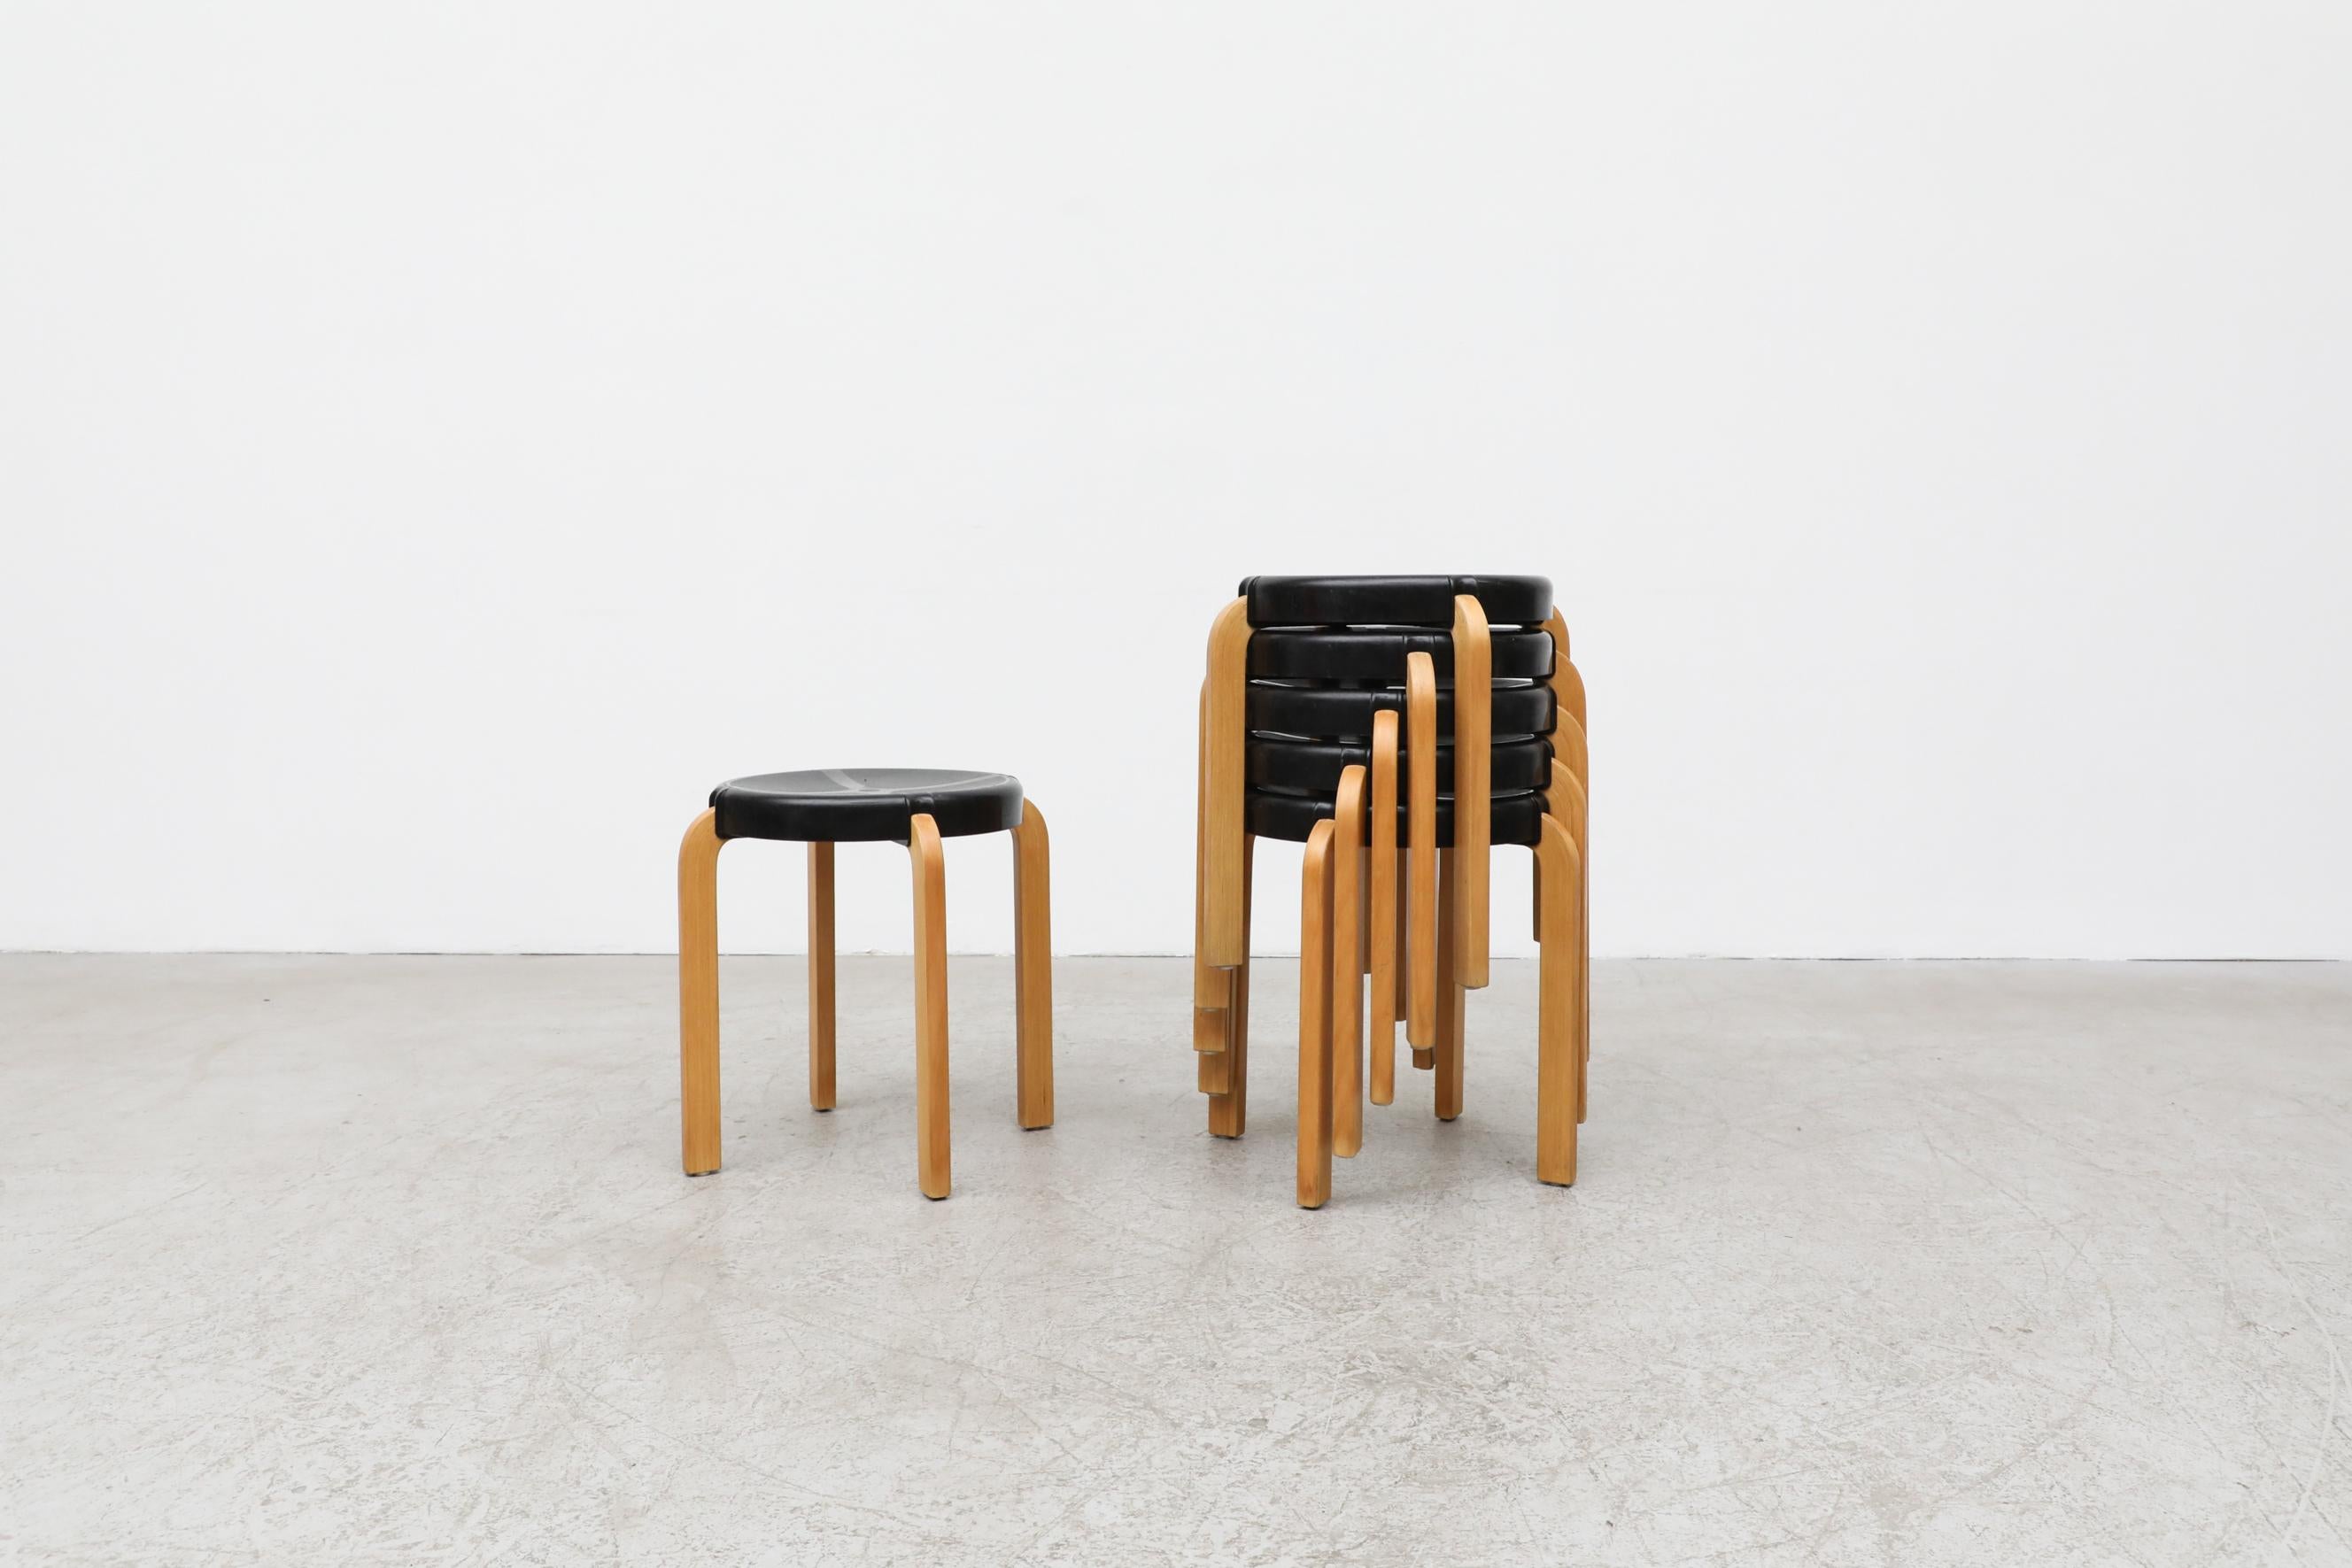 Alvar Aalto style stools with black acrylic seat by Kembo. The stools feature Aalto style bent birch legs, with molded black plastic seats. All in original condition with visible wear and patina. Wear is consistent with their age and use. Priced